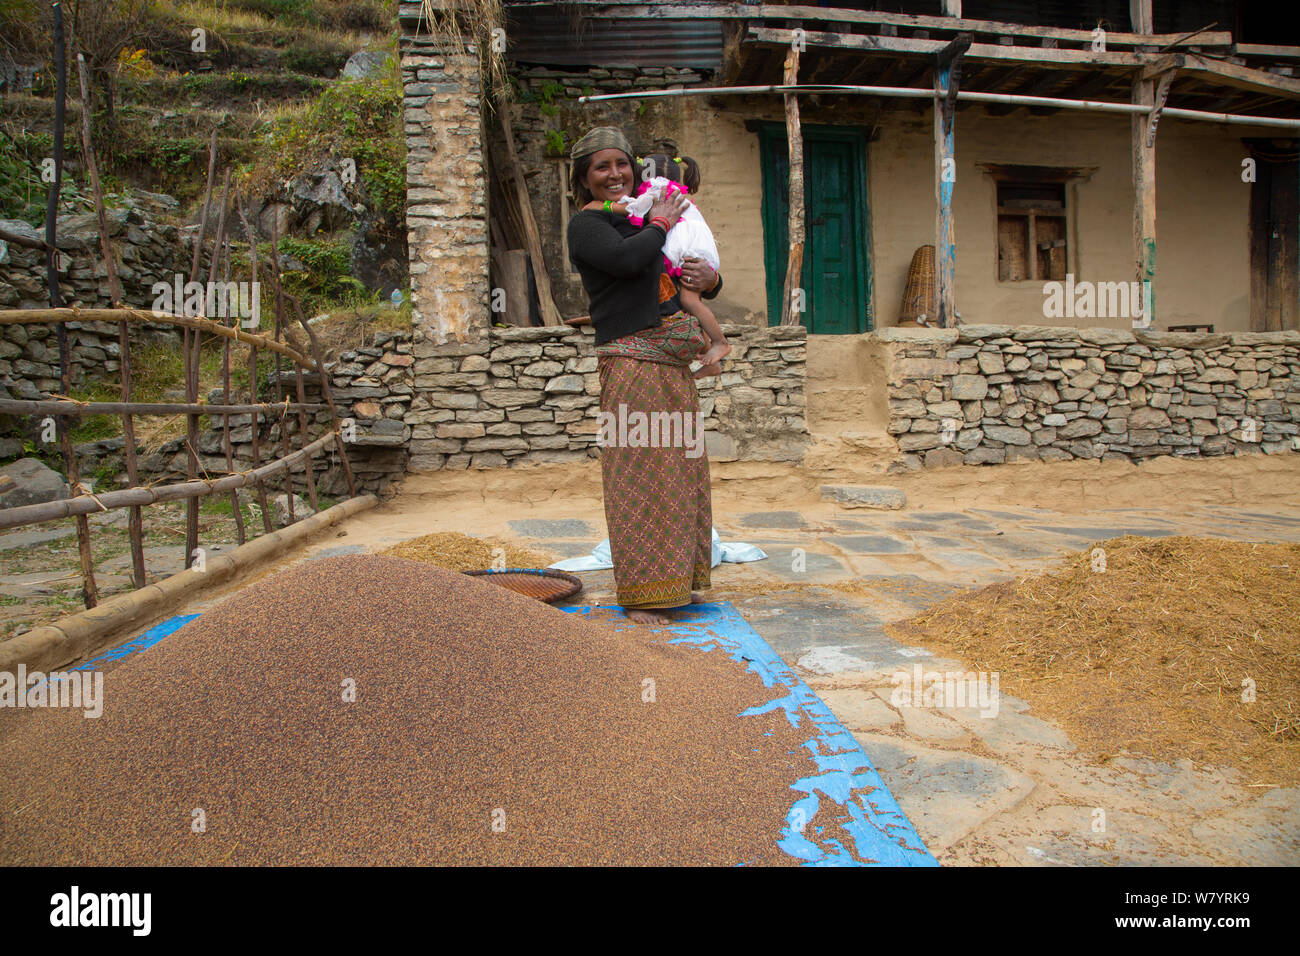 Mother with daughter amongst wheat separated from chaff, near the mountain village of Ghandruk, Modi Khola Valley, Himalayas, Nepal. November 2014. Stock Photo